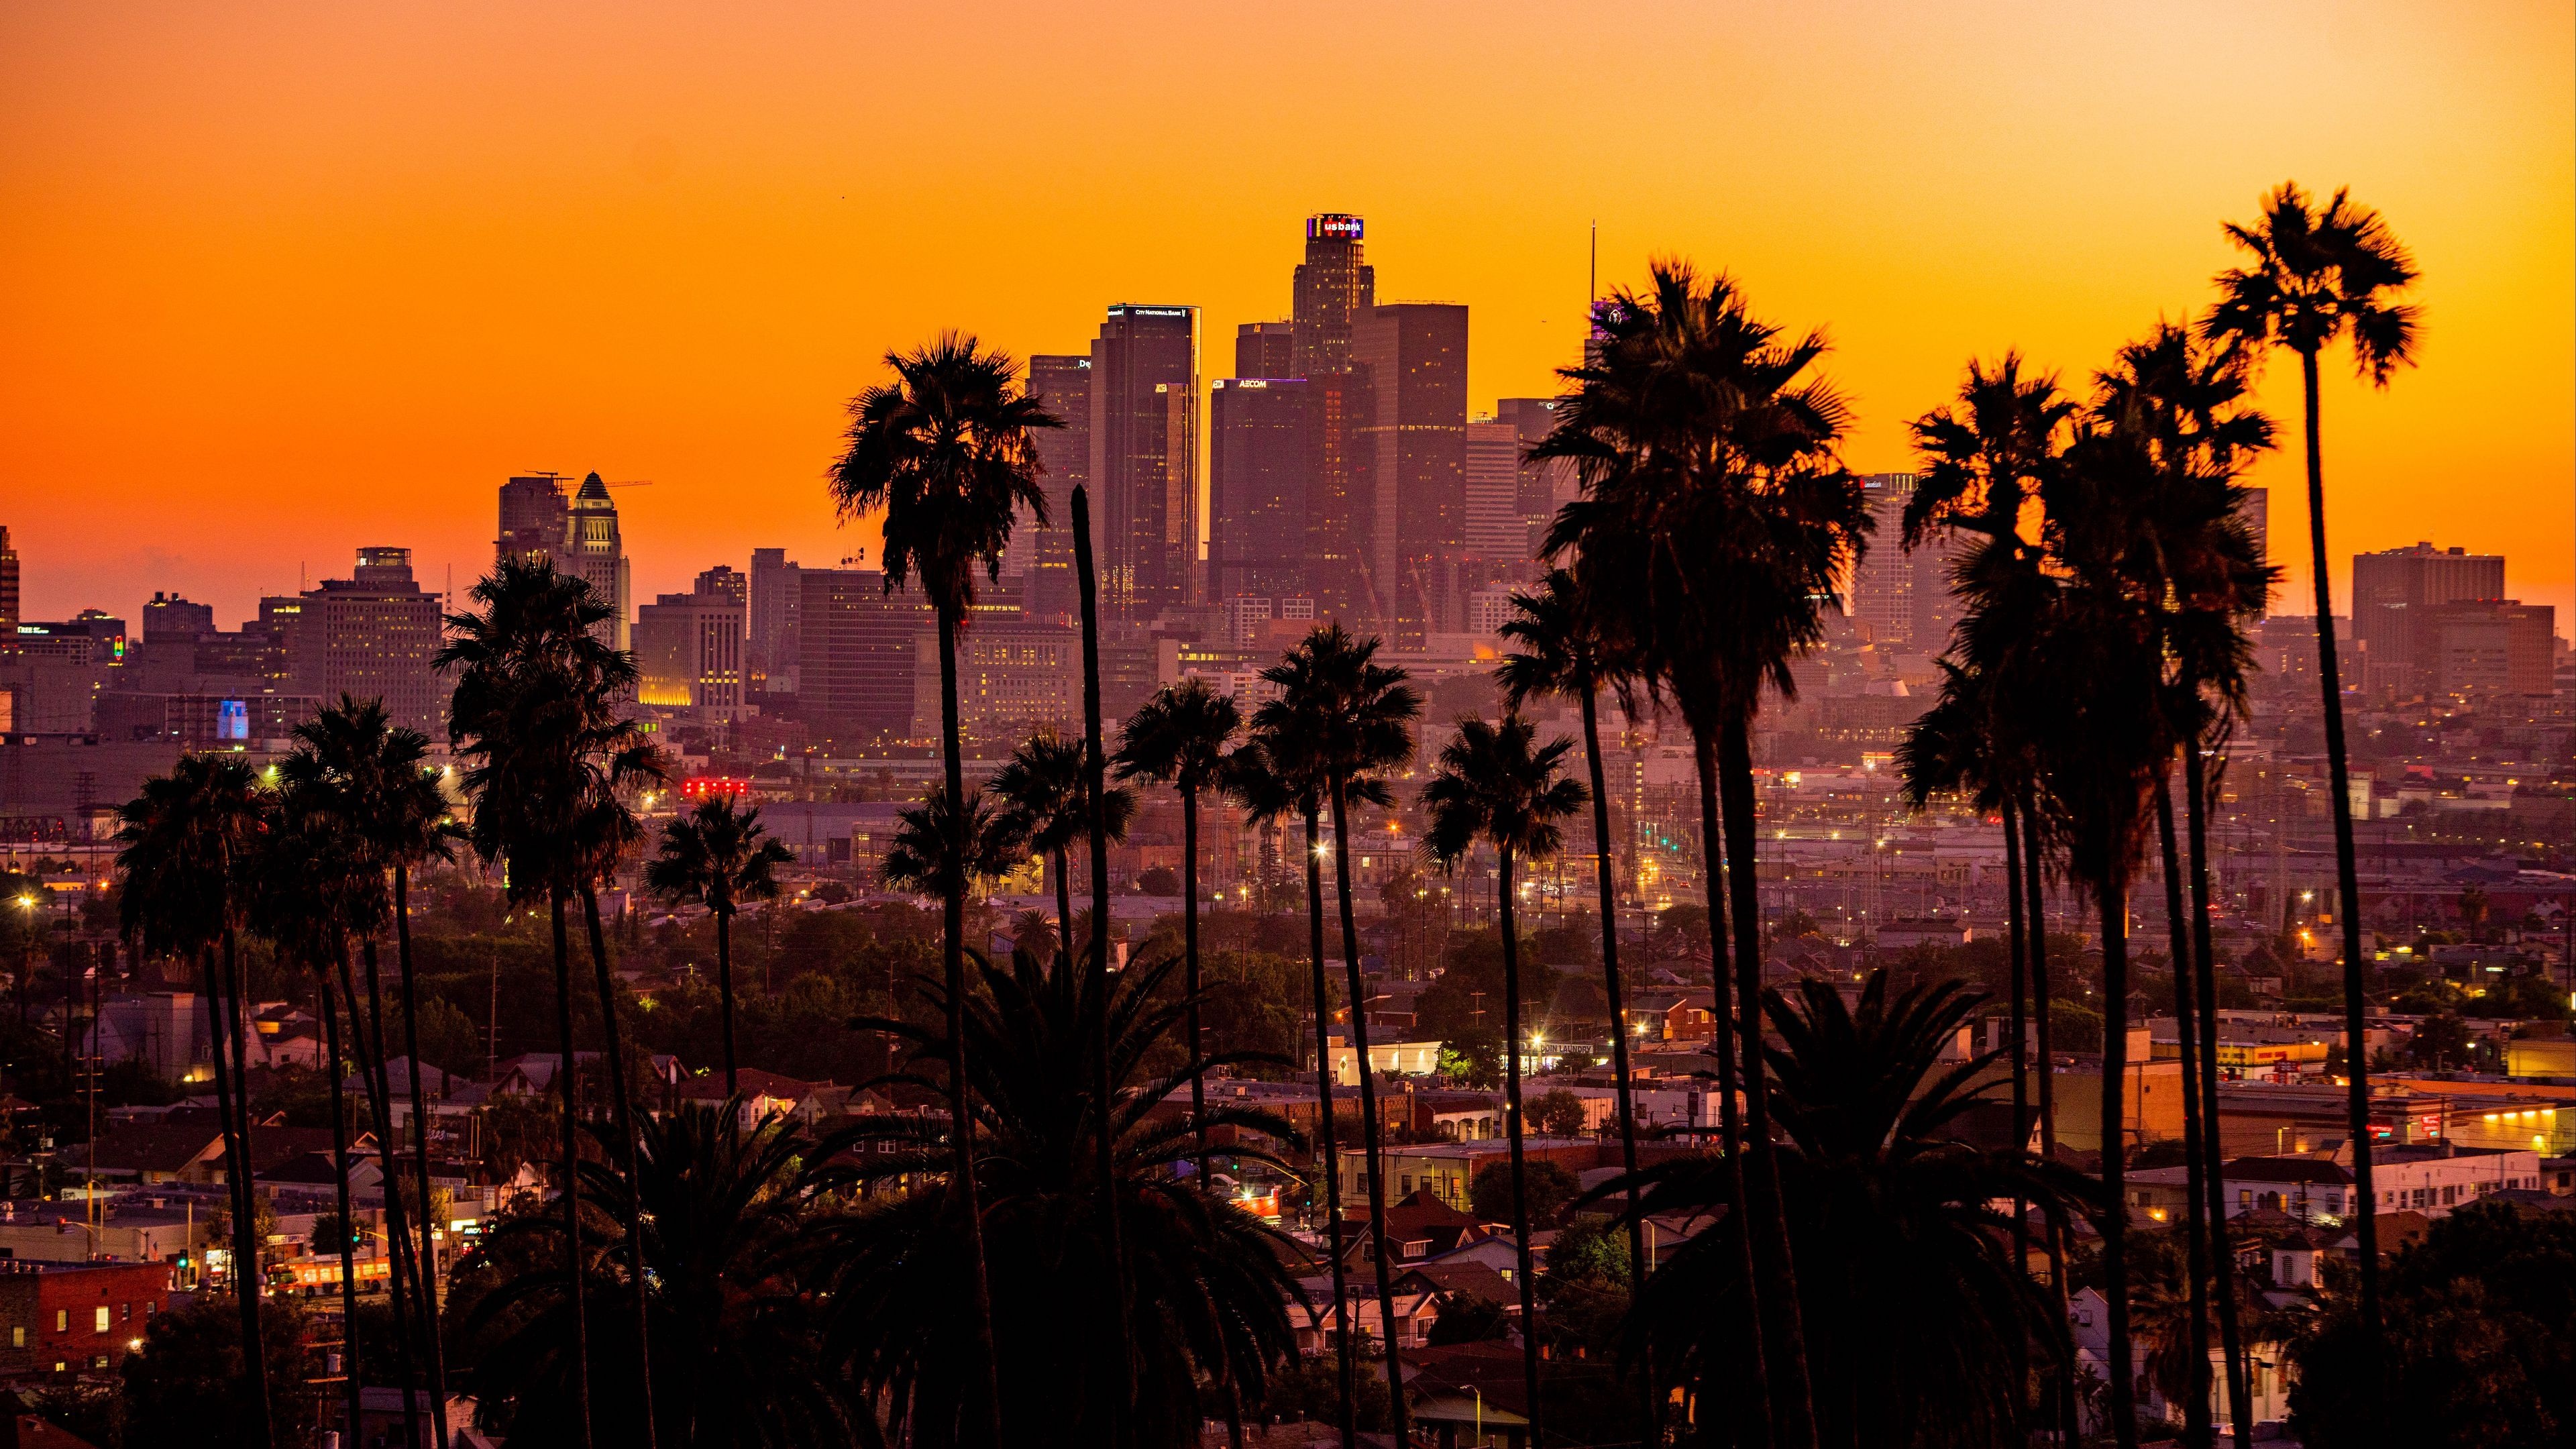 Los Angeles: The second most populous city in the United States after New York City. 3840x2160 4K Background.